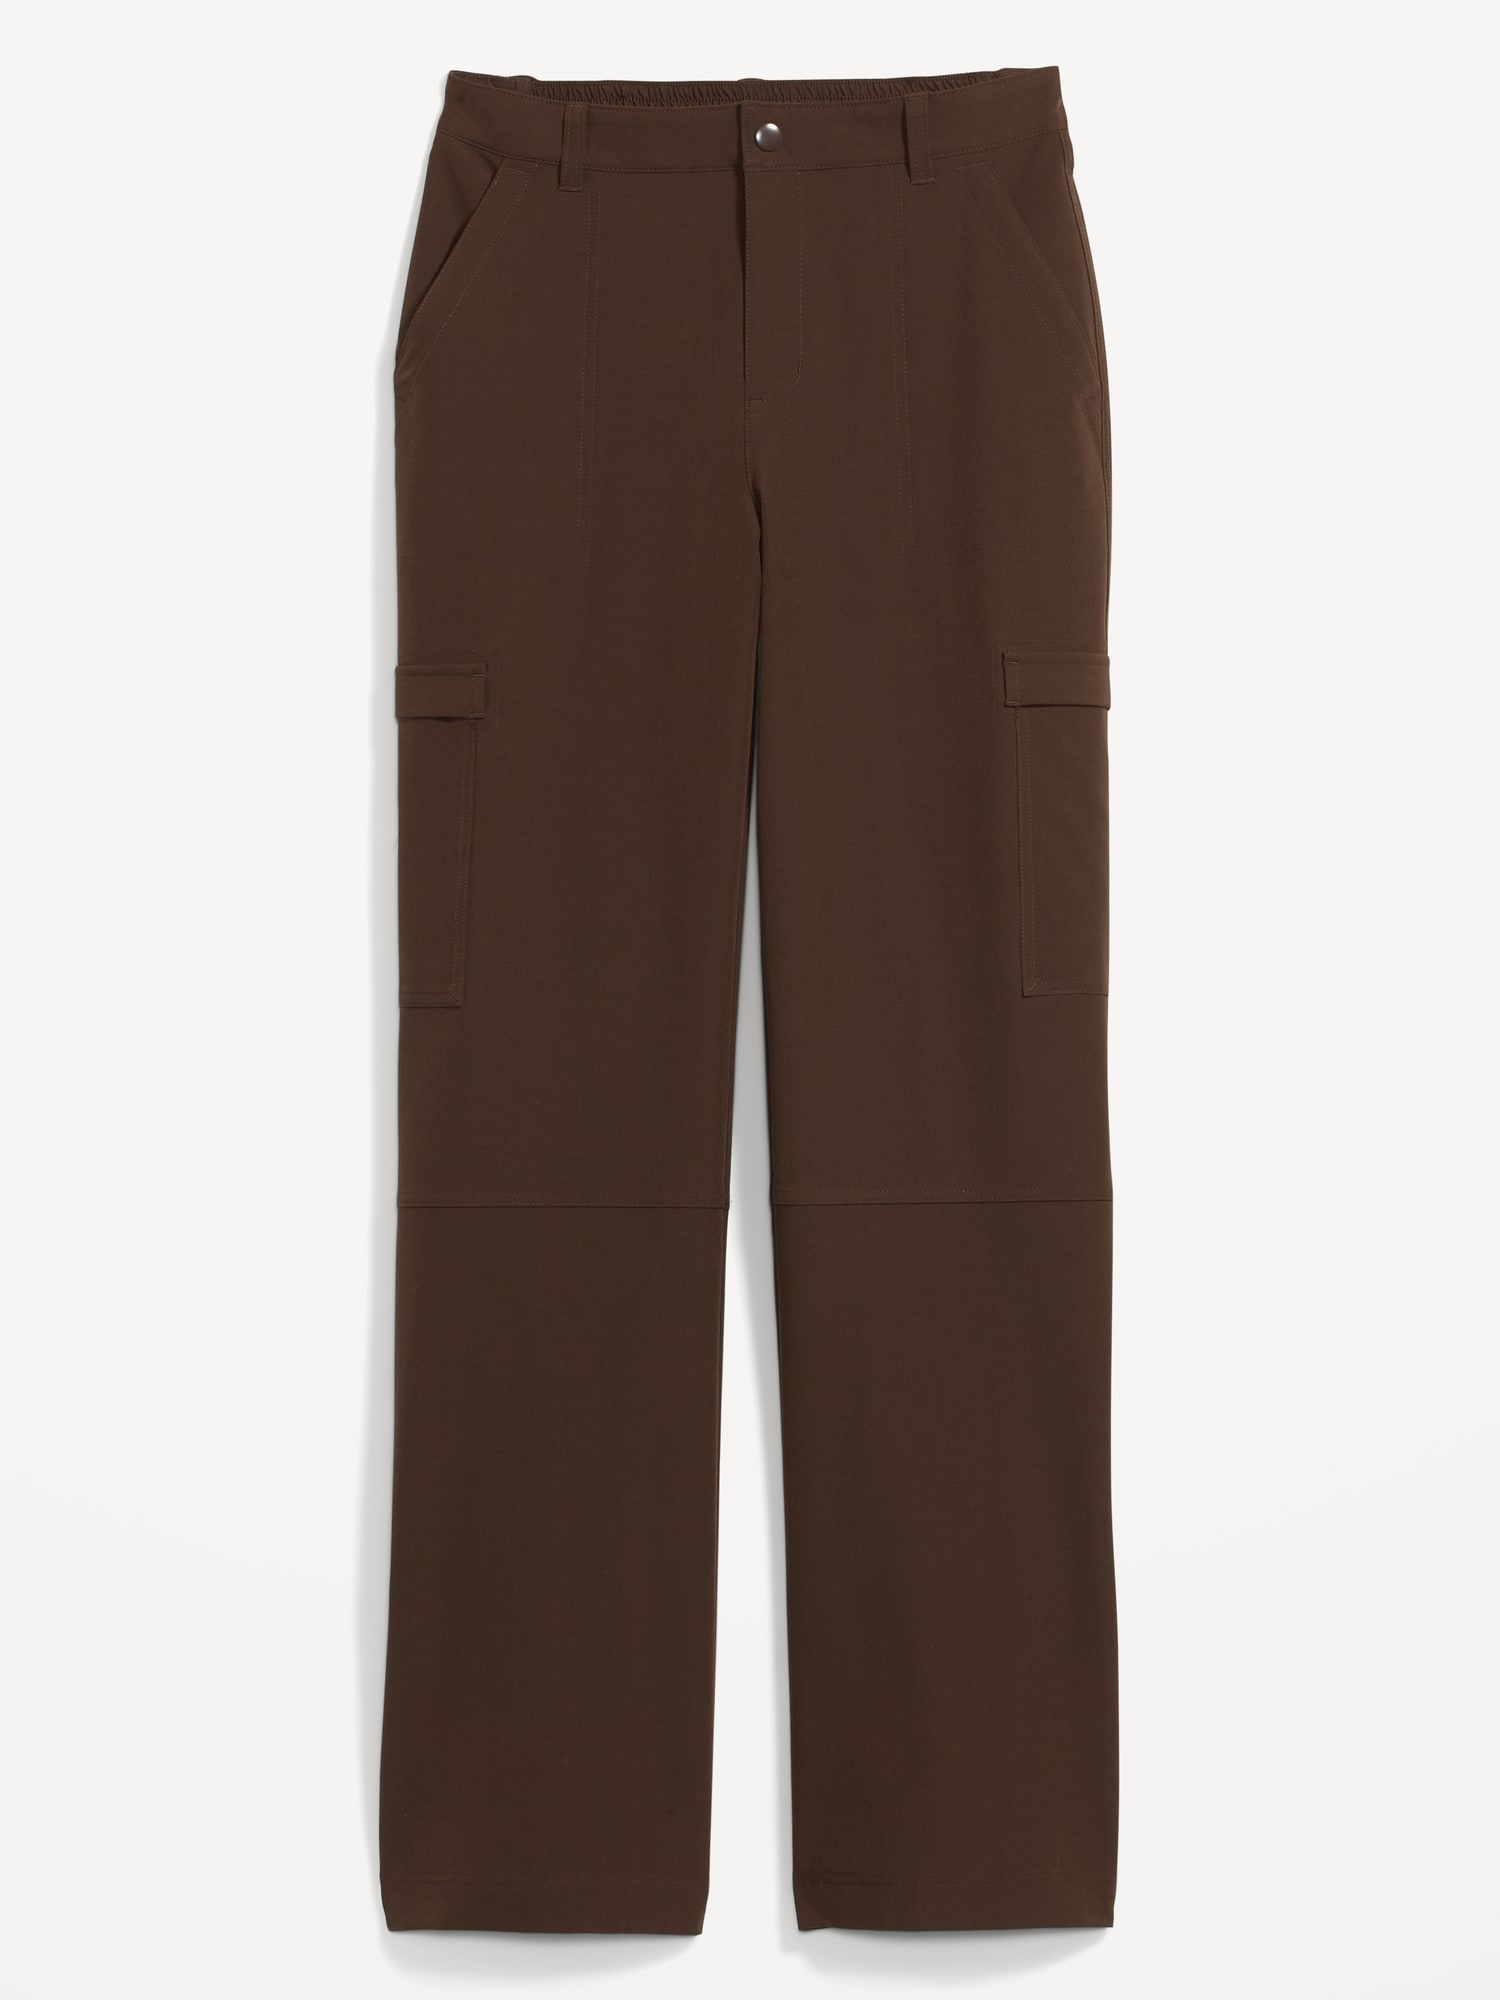 High-Waisted All-Seasons StretchTech Cargo Pants for Women | Old Navy